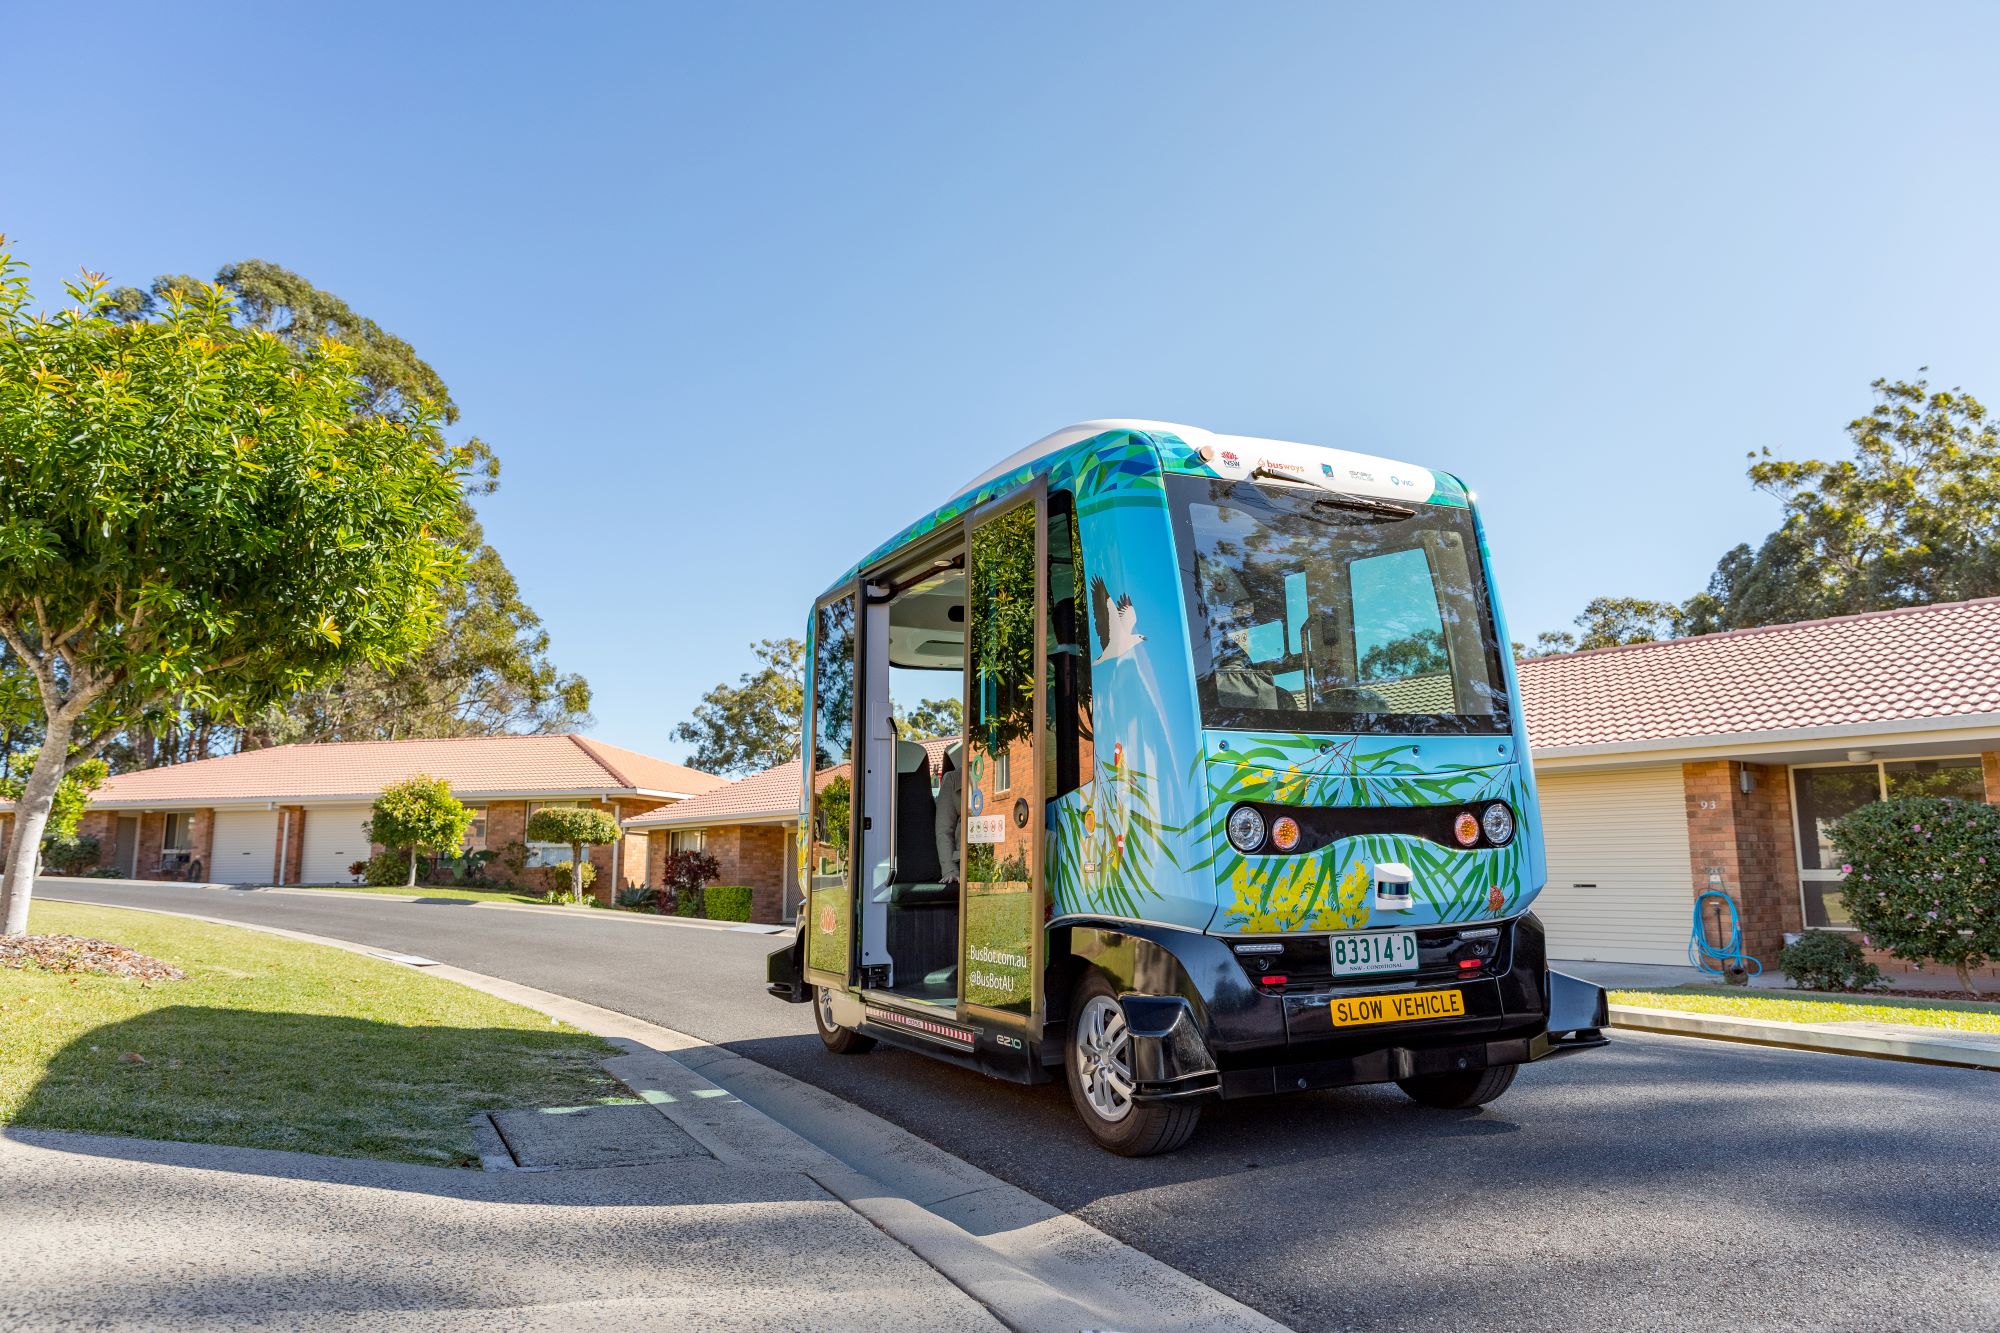 Australia’s first regional automated vehicle trial has moved into phase two with world firsts